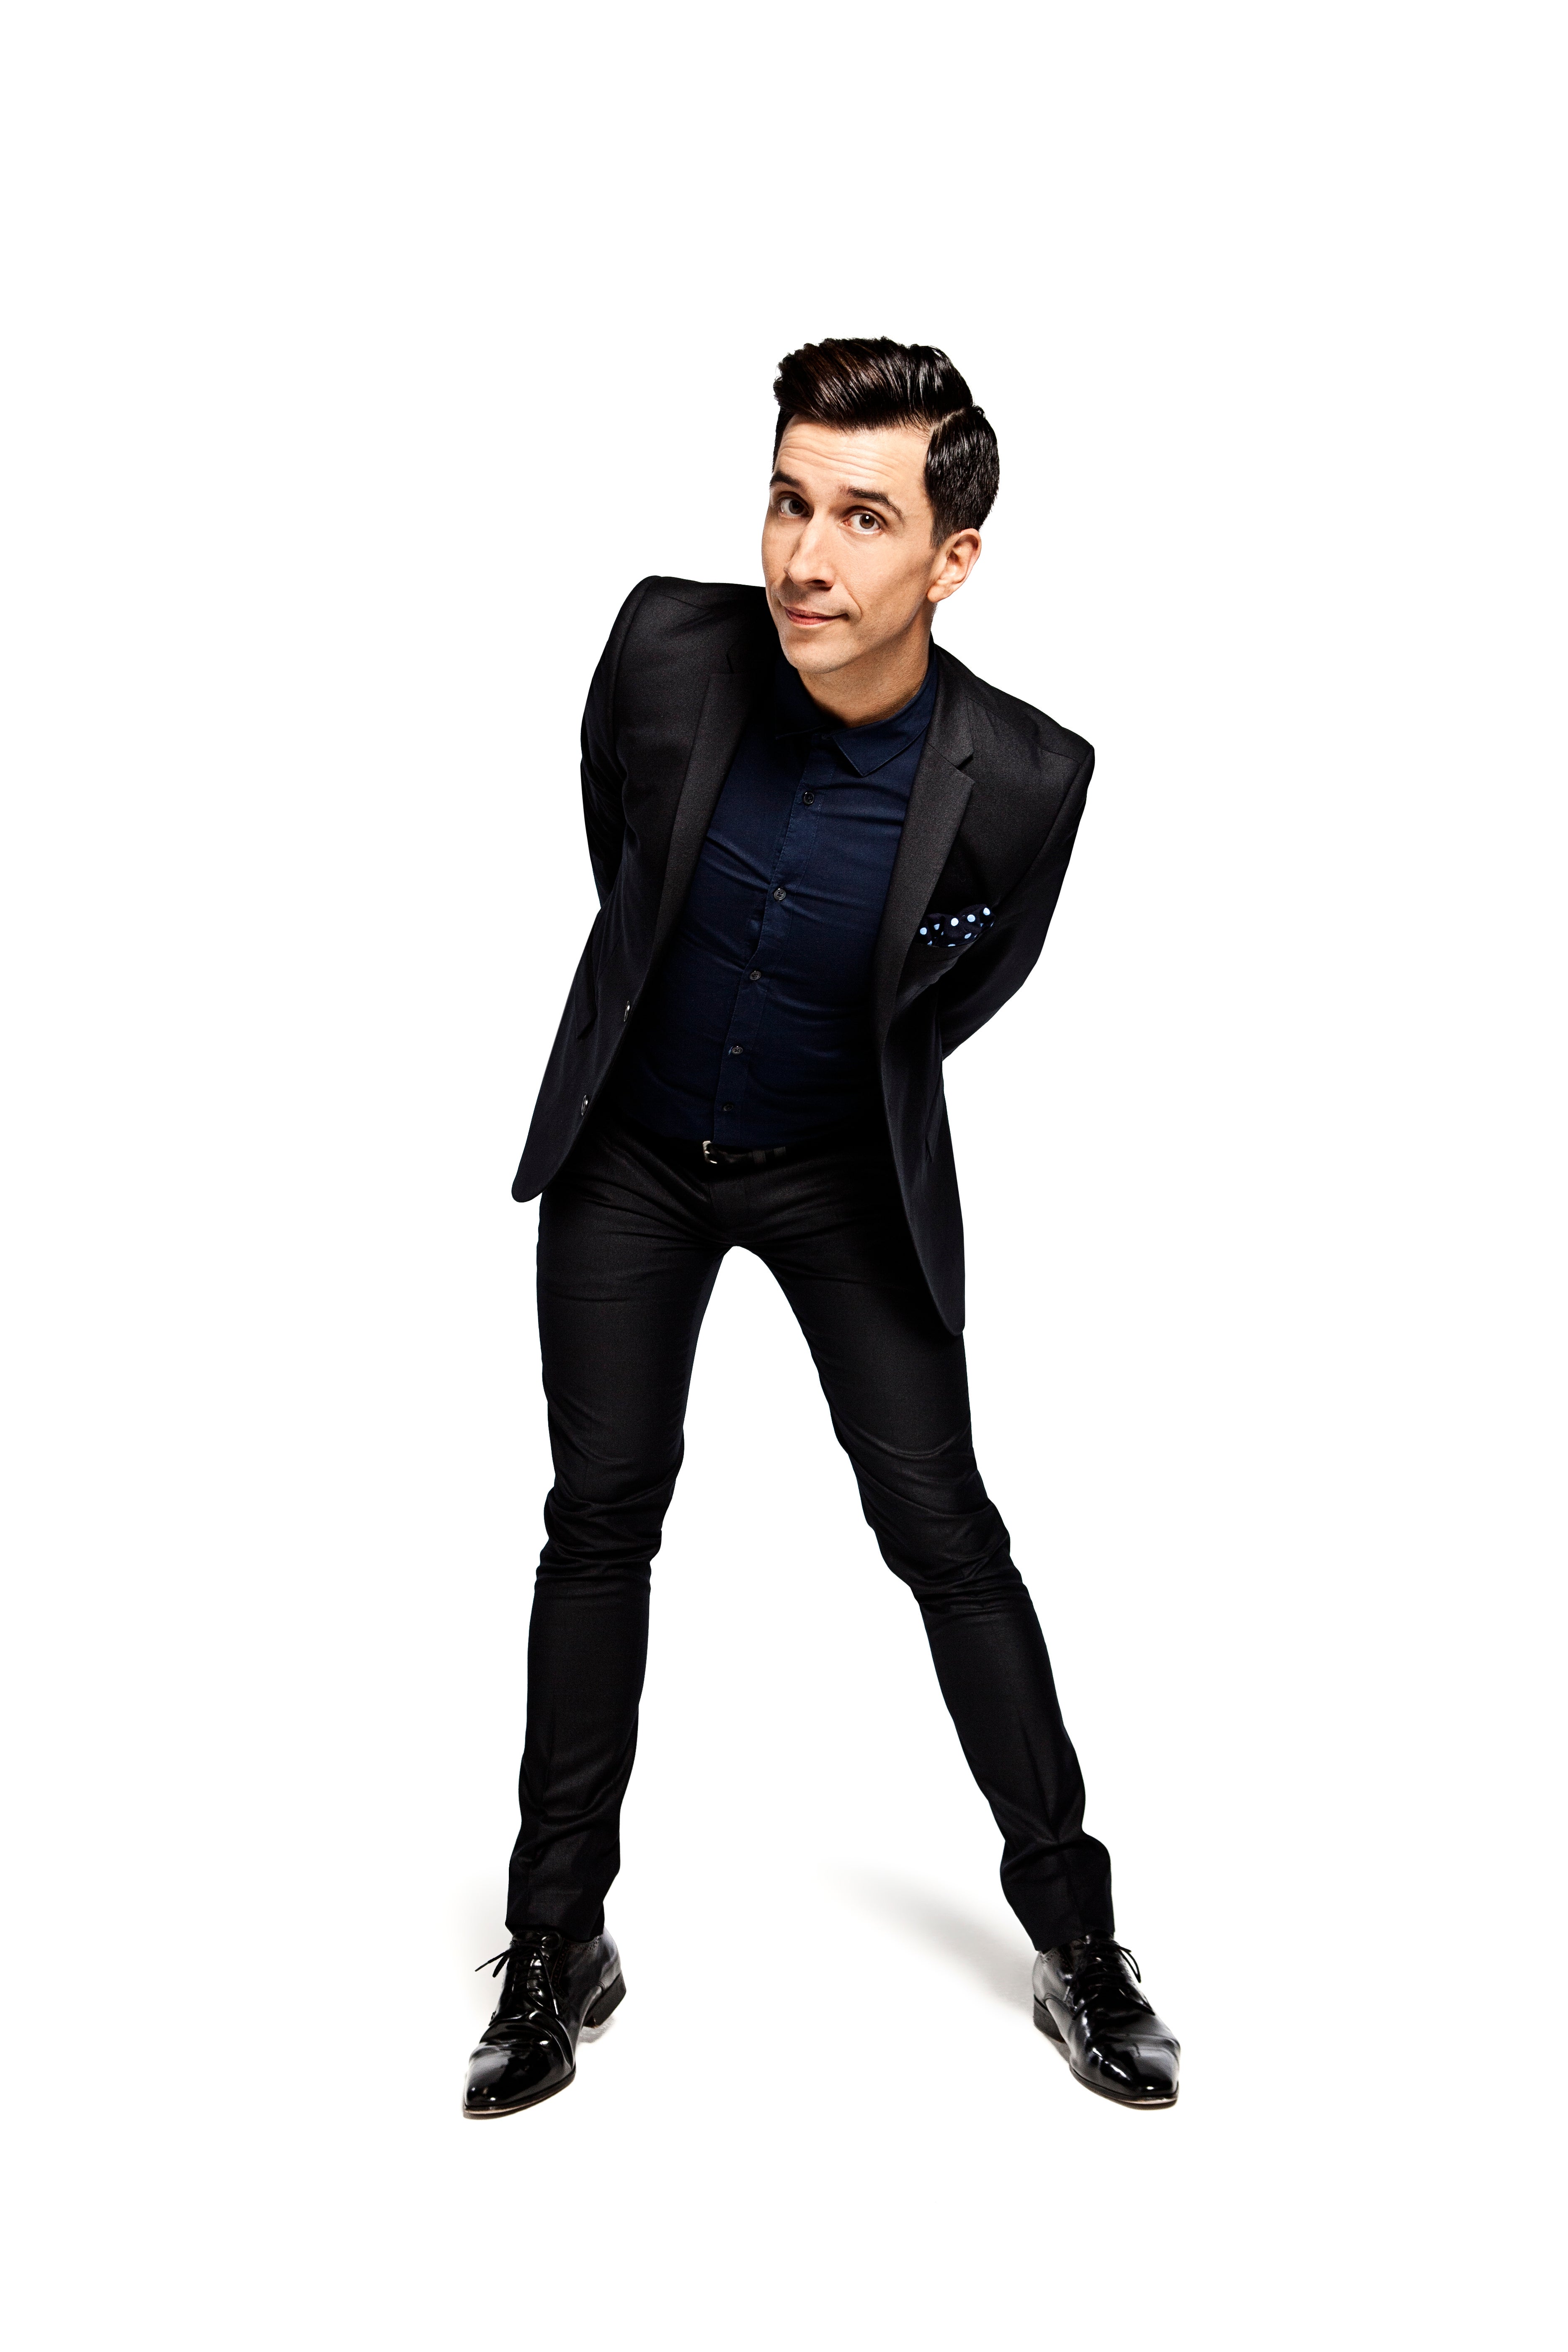 Russell Kane: Hyperactive presale code for approved tickets in Liverpool